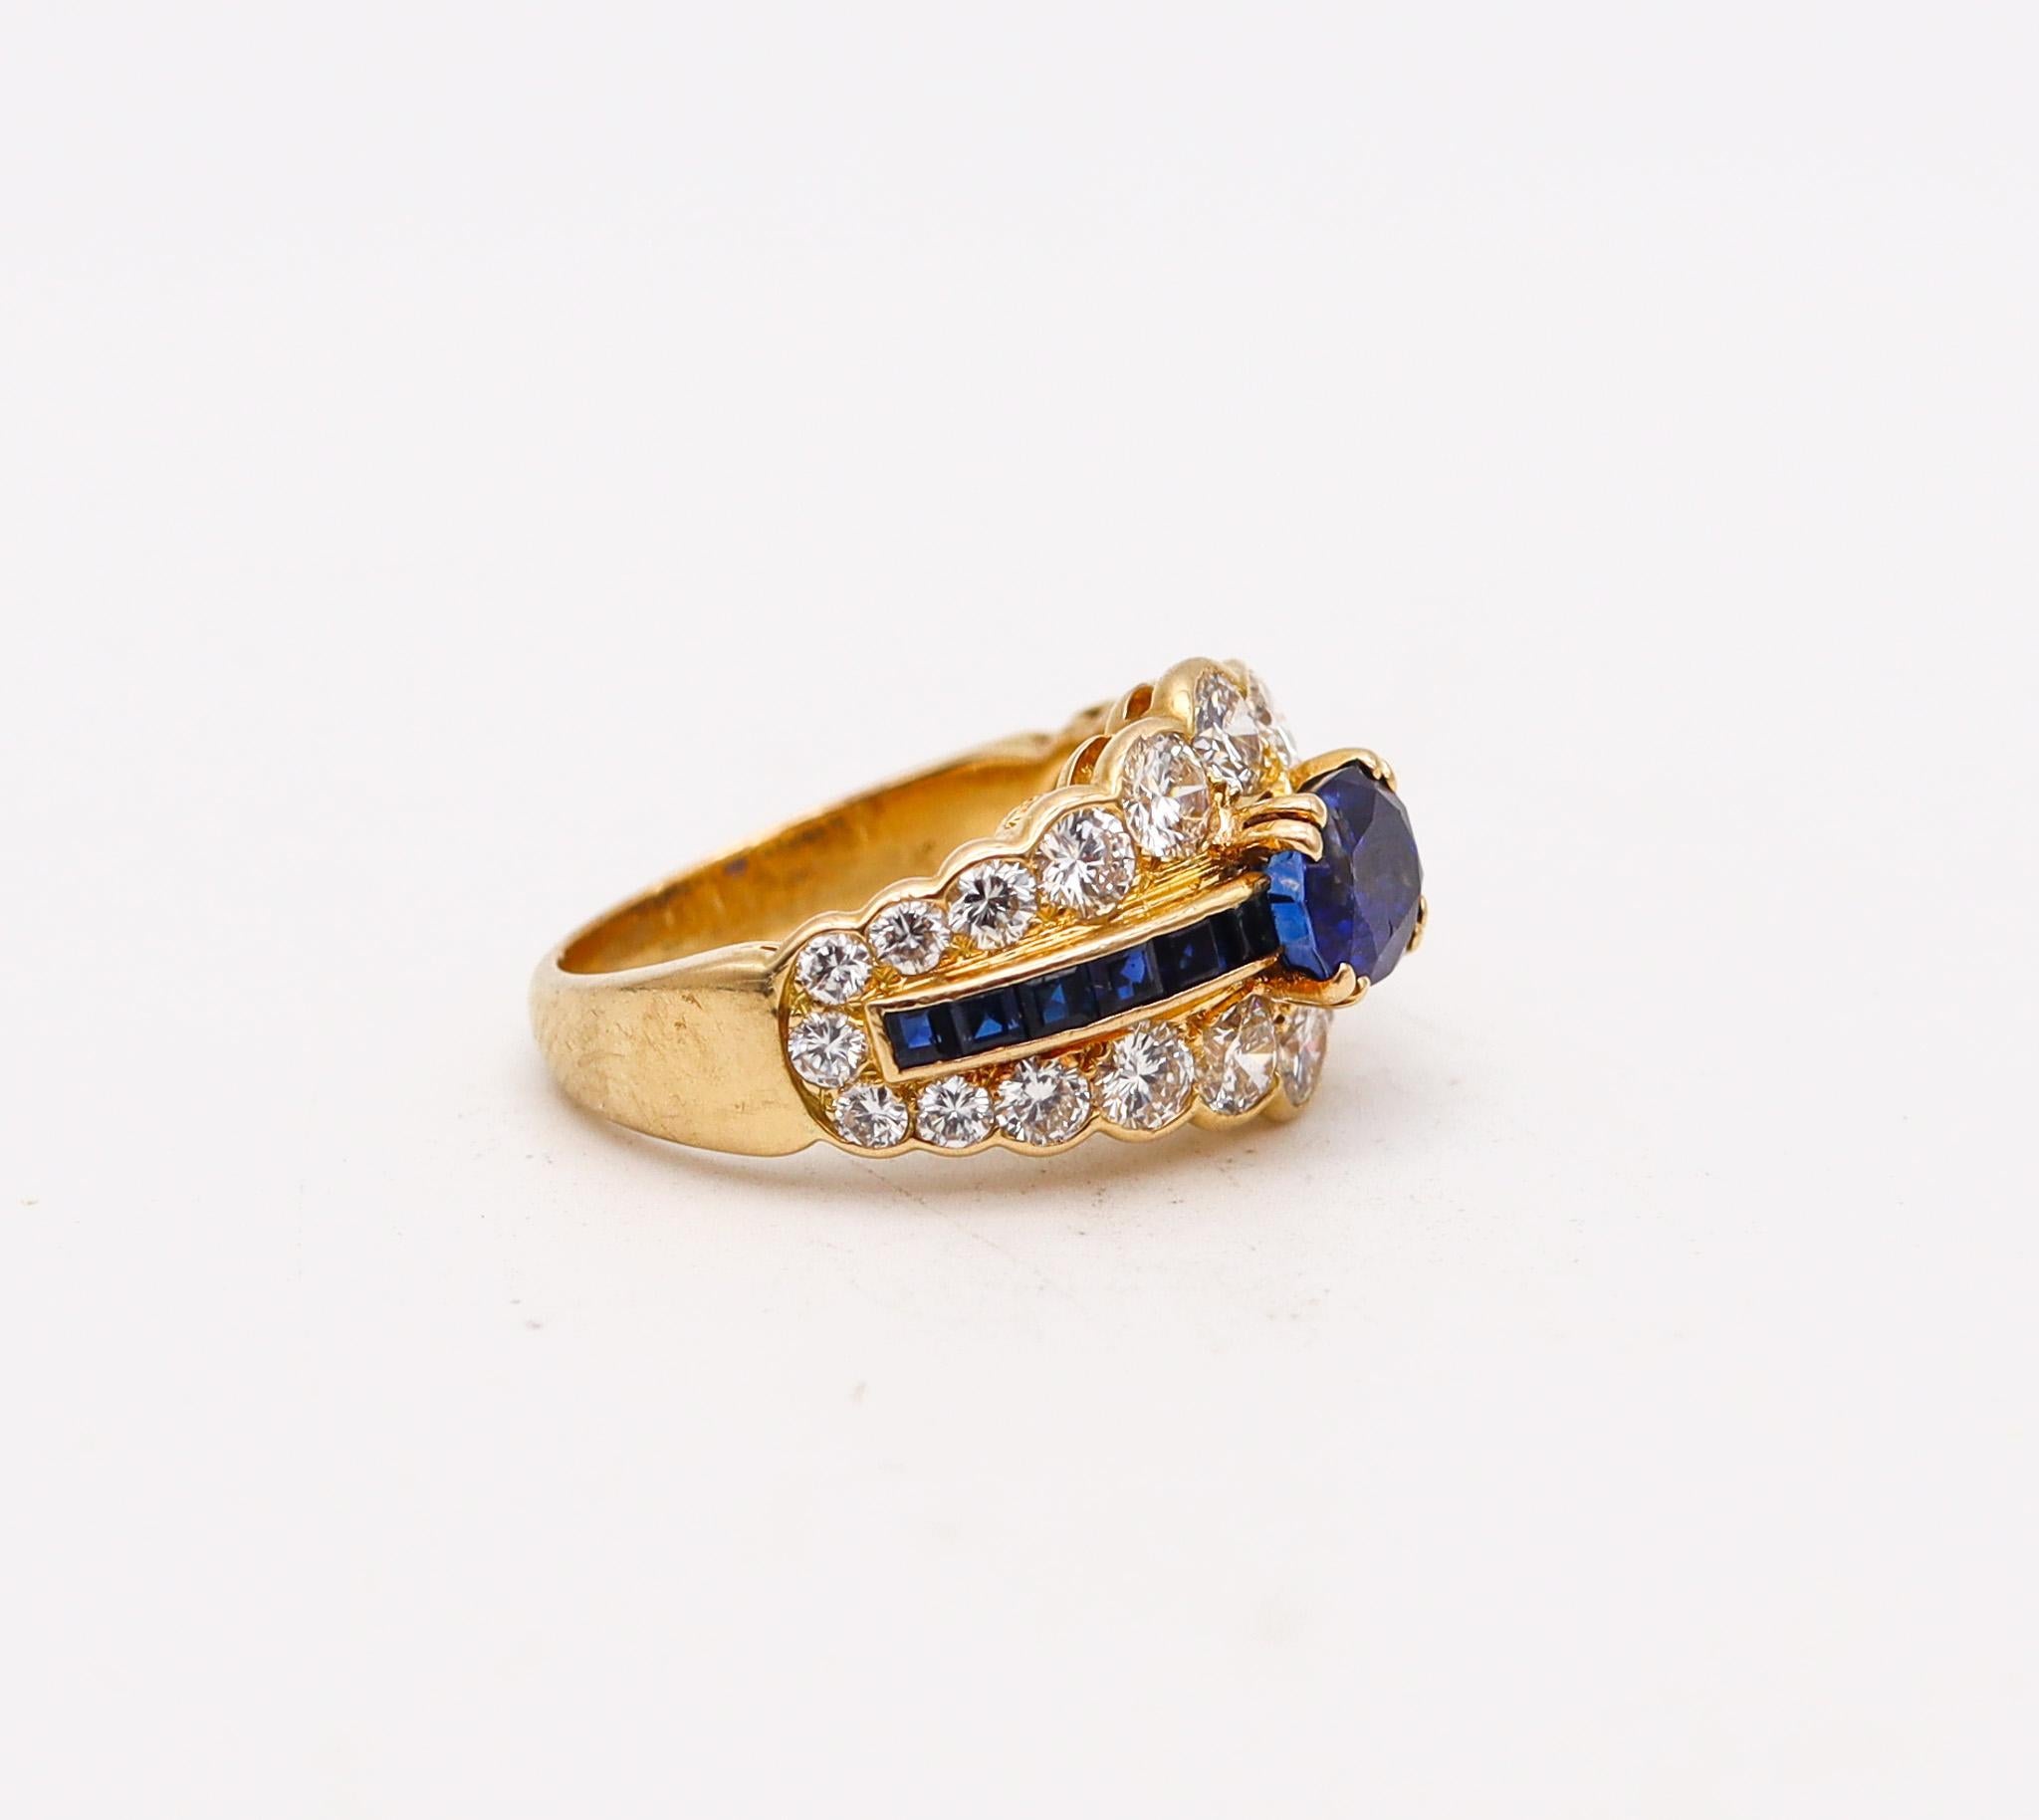 Brilliant Cut Andre Vassort 1970 Ring In 18Kt Gold With 4.86 Ctw In Diamonds And Sapphires For Sale